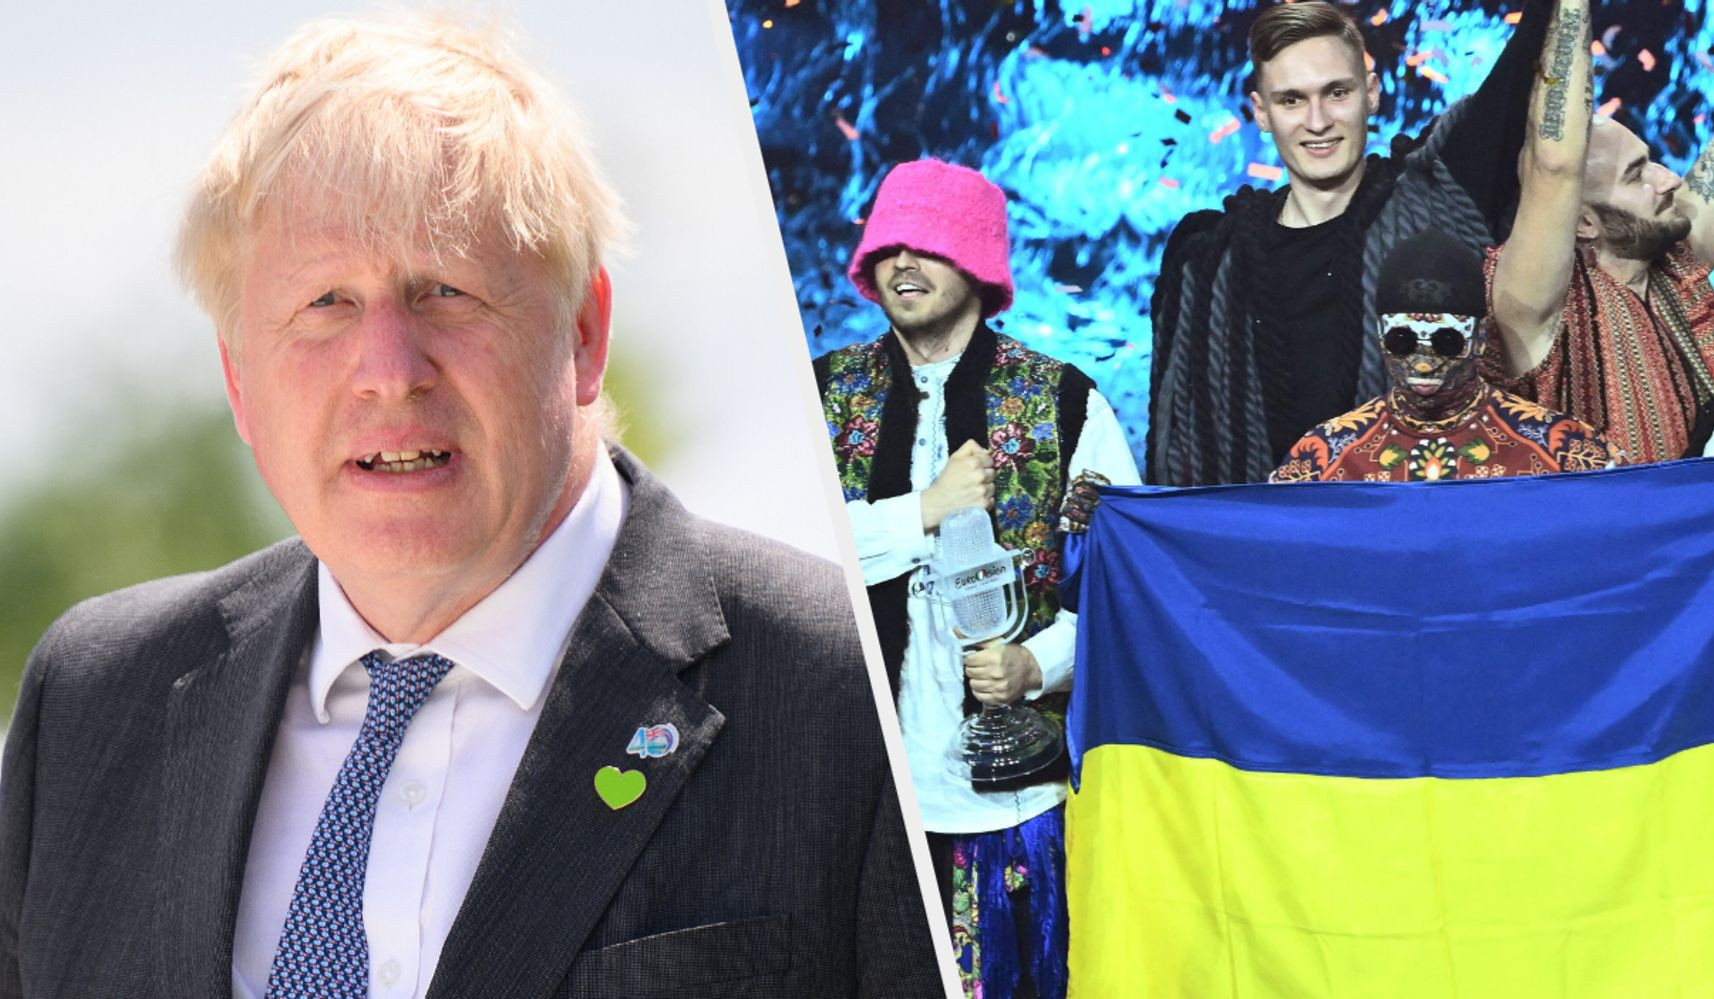 Ukraine can and should host next Eurovision Song Contest: Johnson